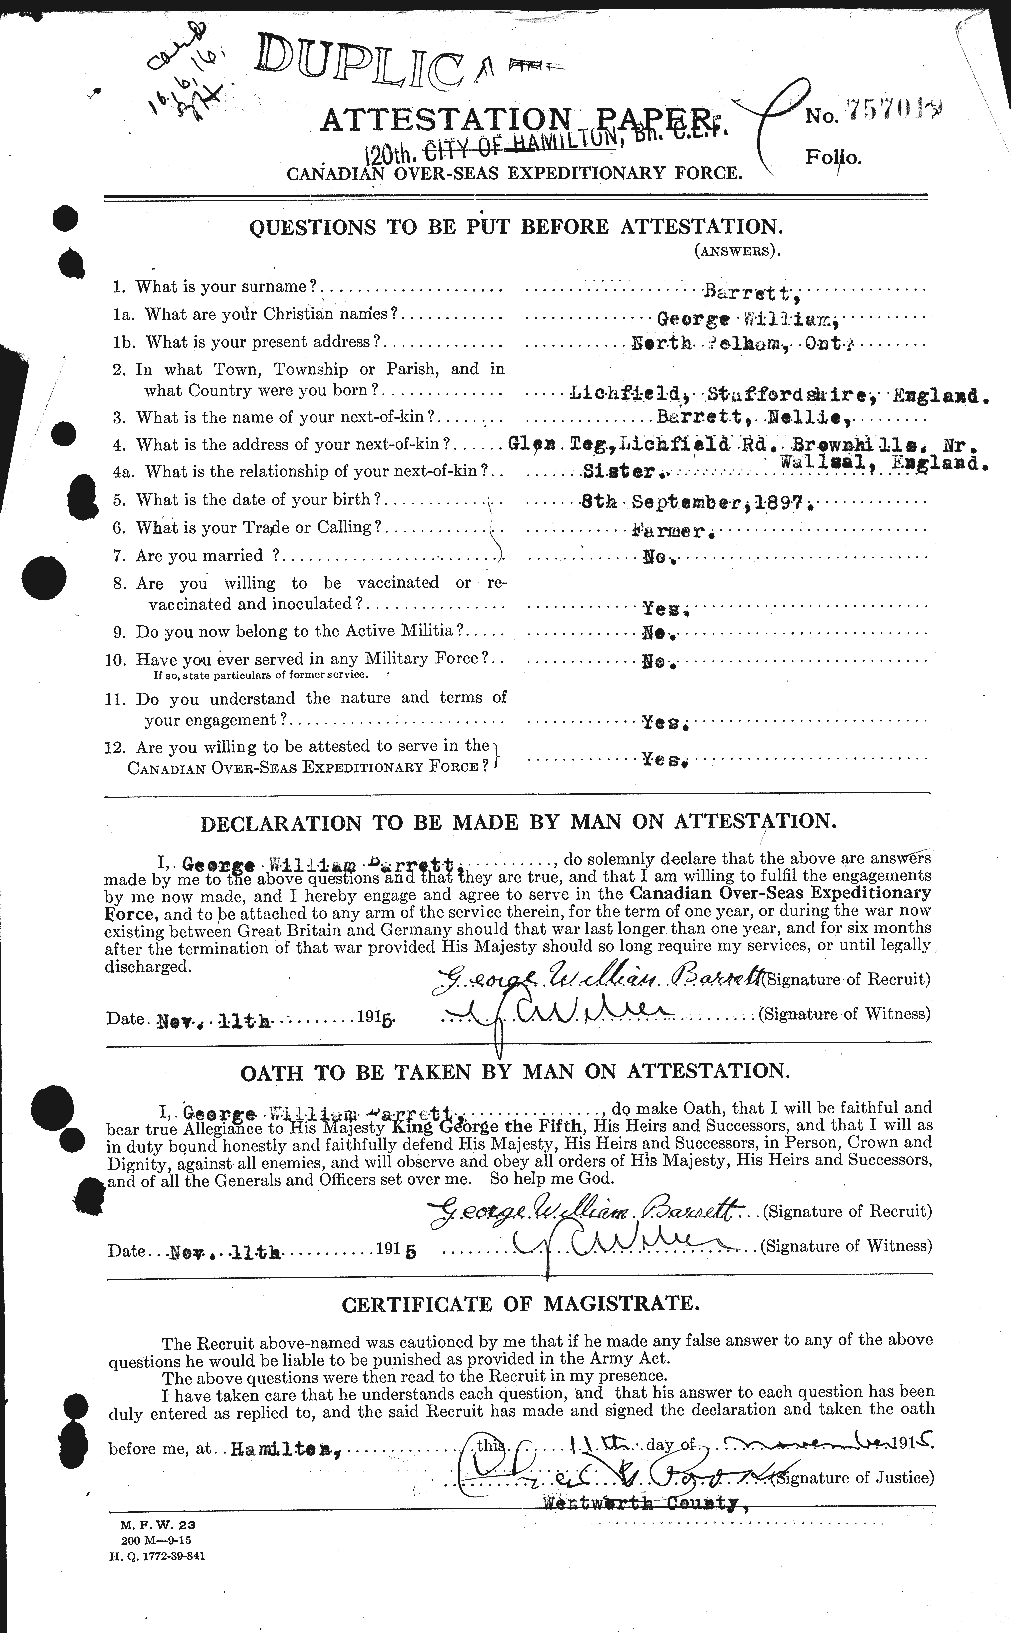 Personnel Records of the First World War - CEF 220307a